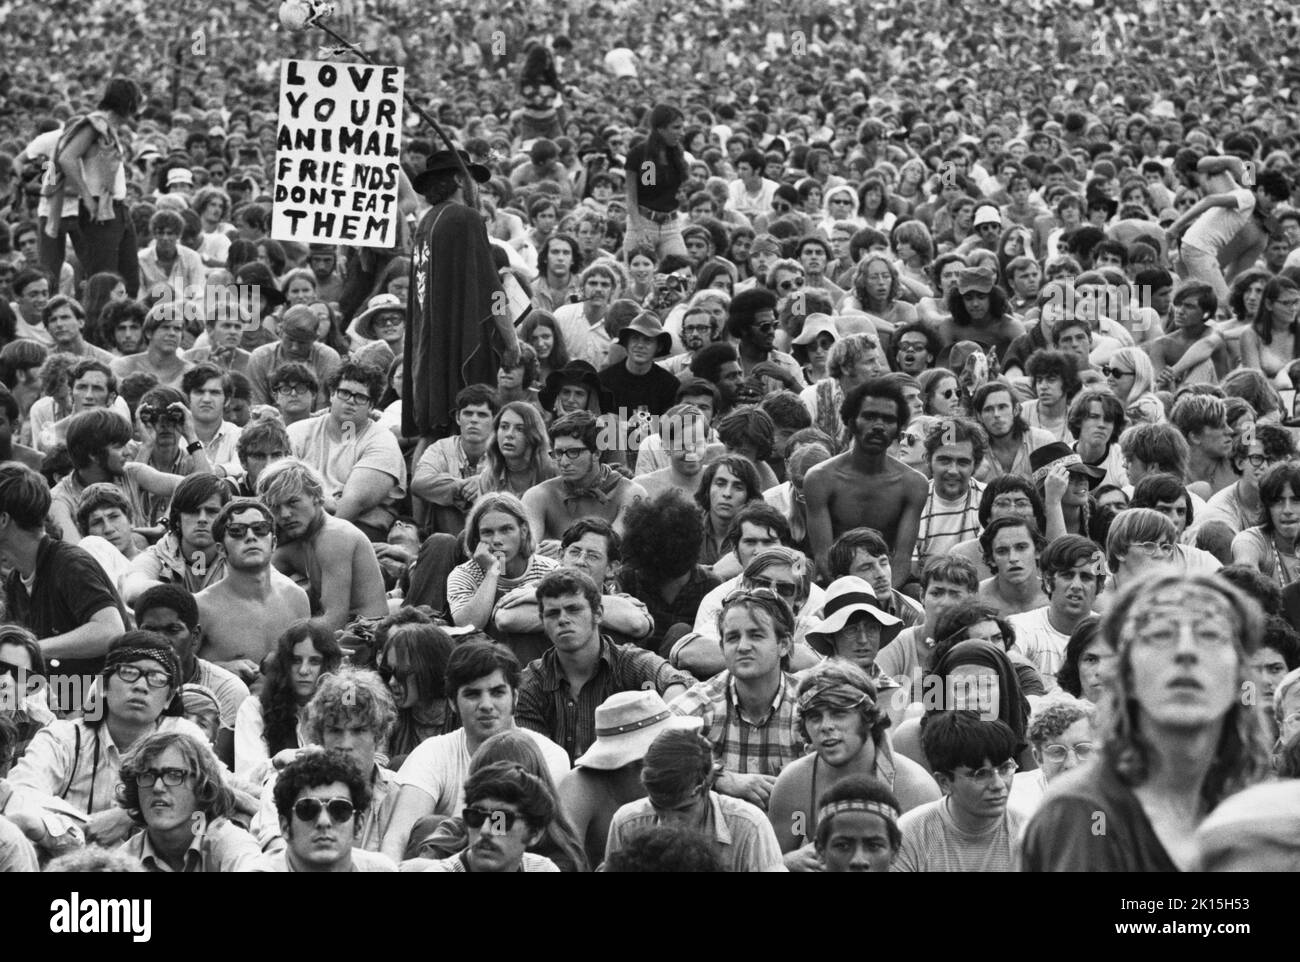 A look at part of the crowd at the Woodstock Music Festival; 1969. Stock Photo